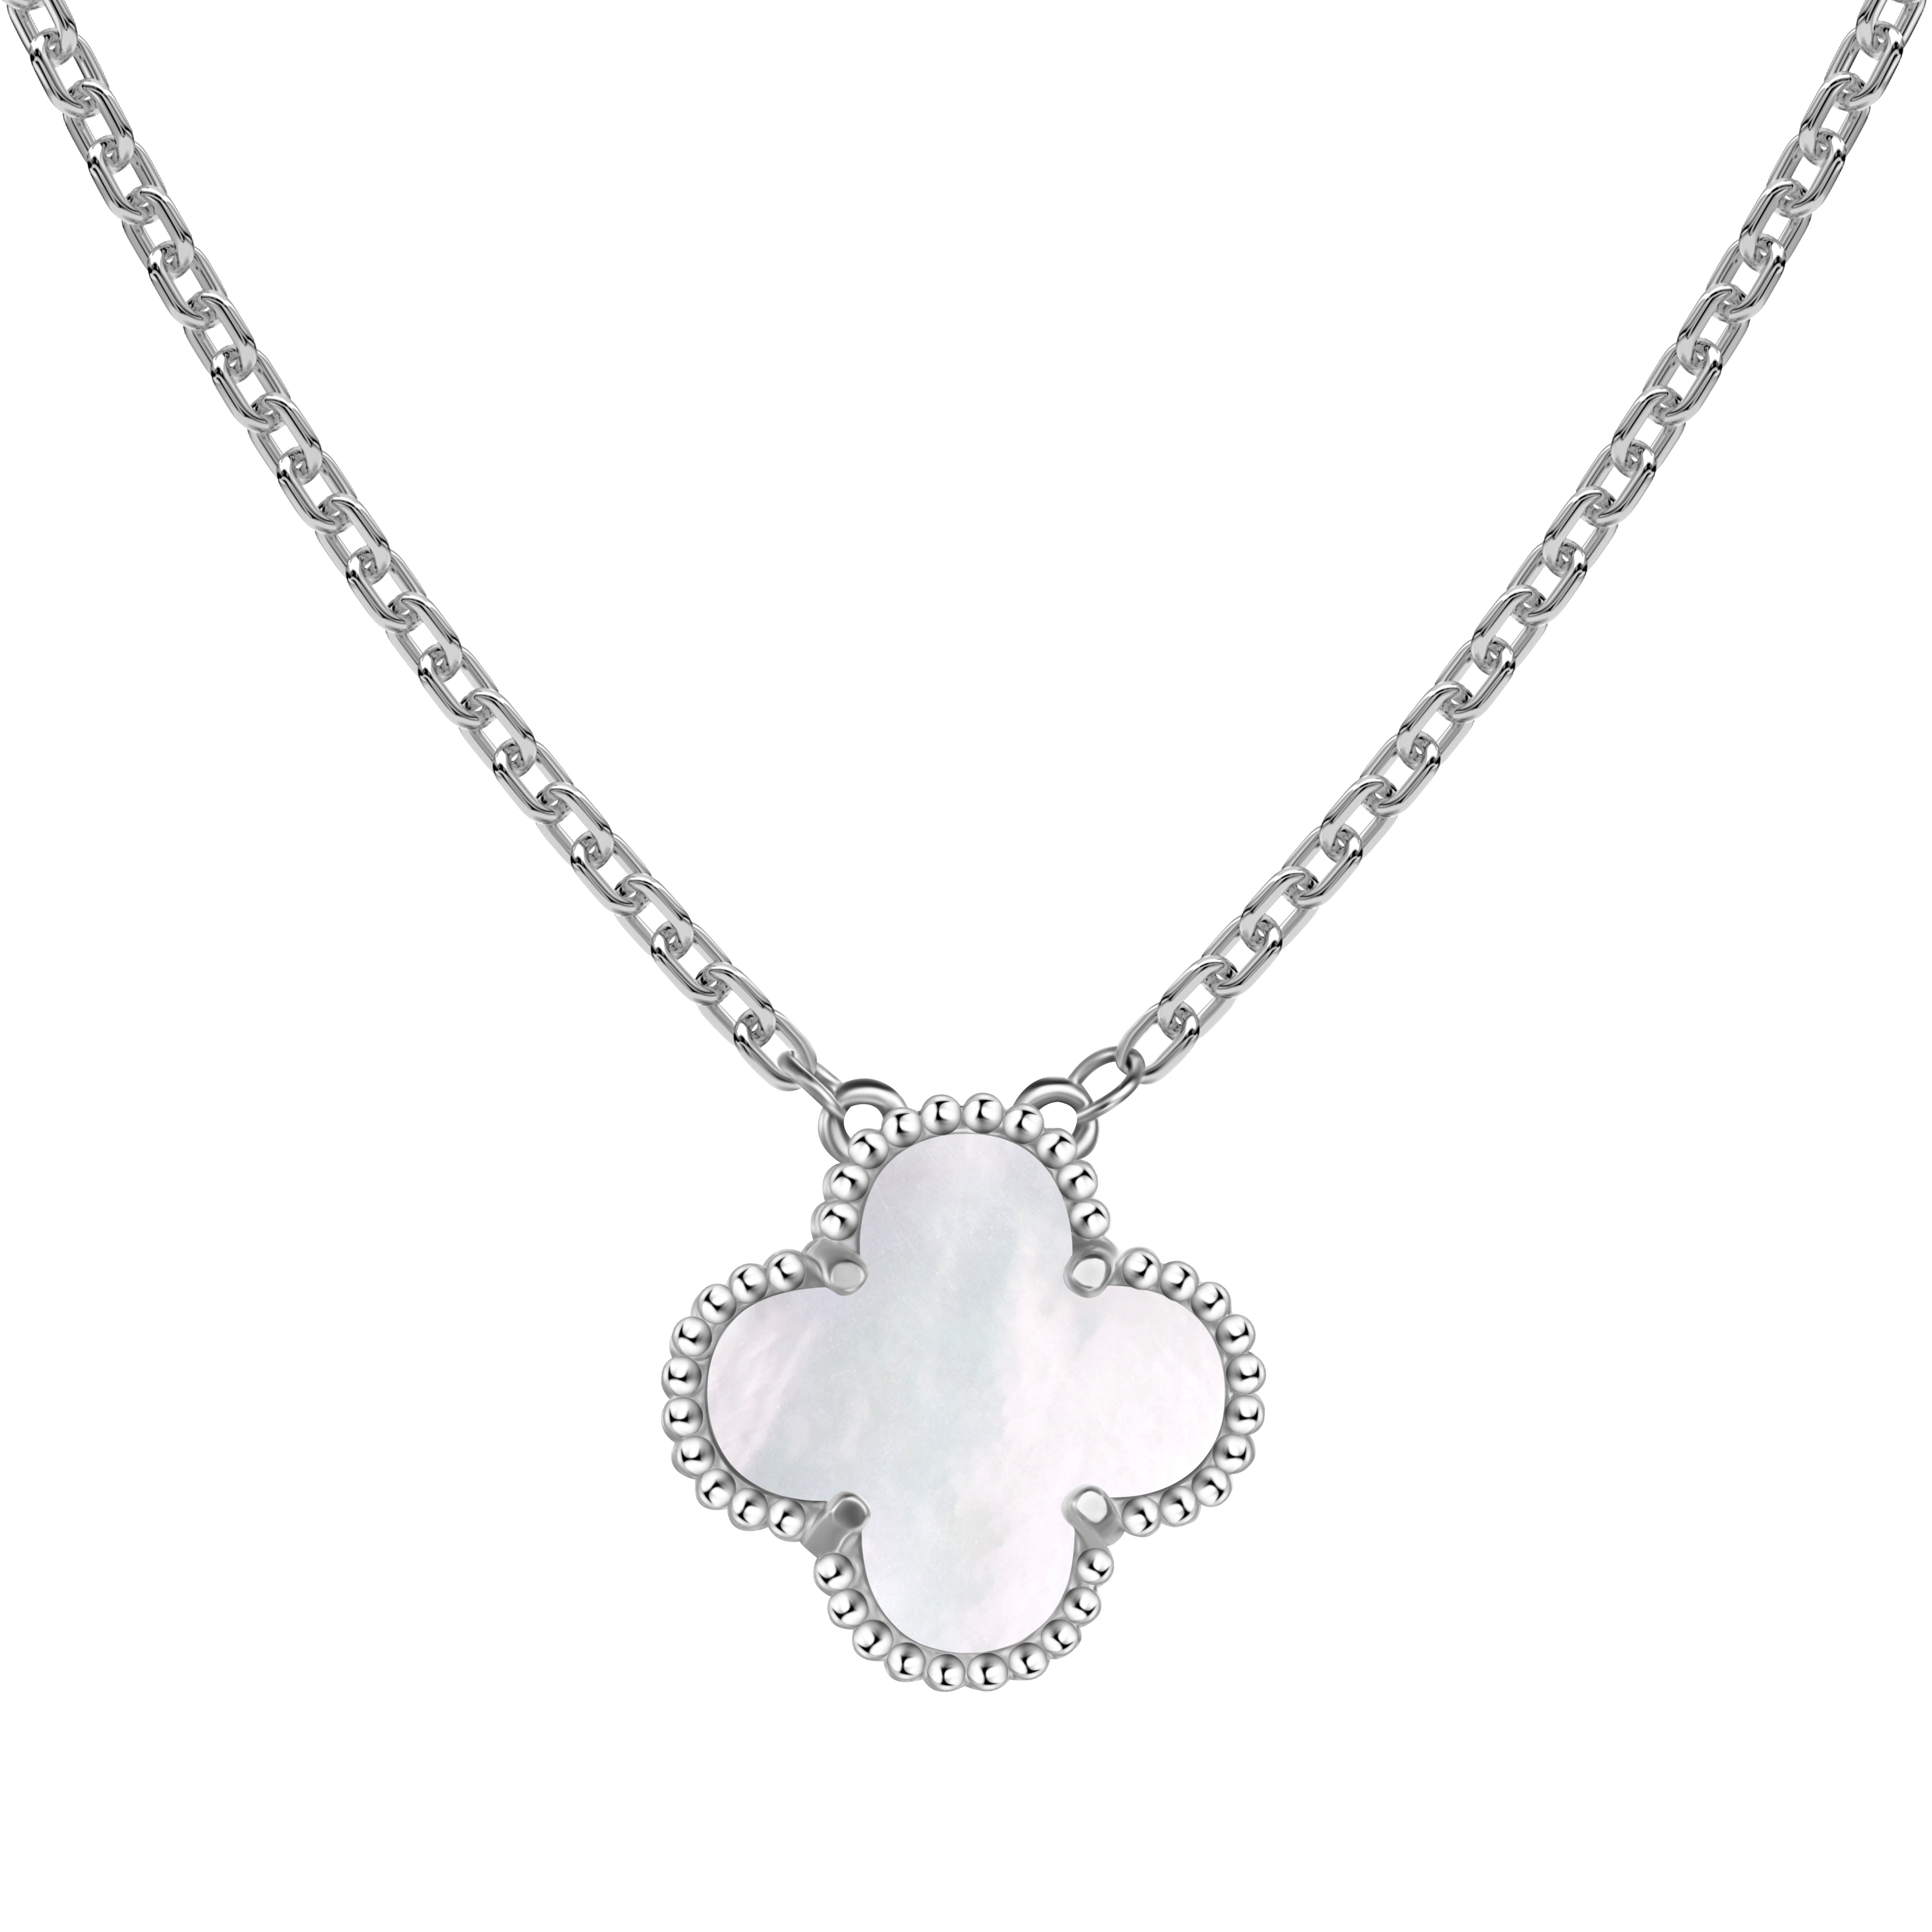 Clover Necklace - in Black/White Shell CZ 5A 925 Sterling Silver 18K Gold Plated (Gold/Silver)